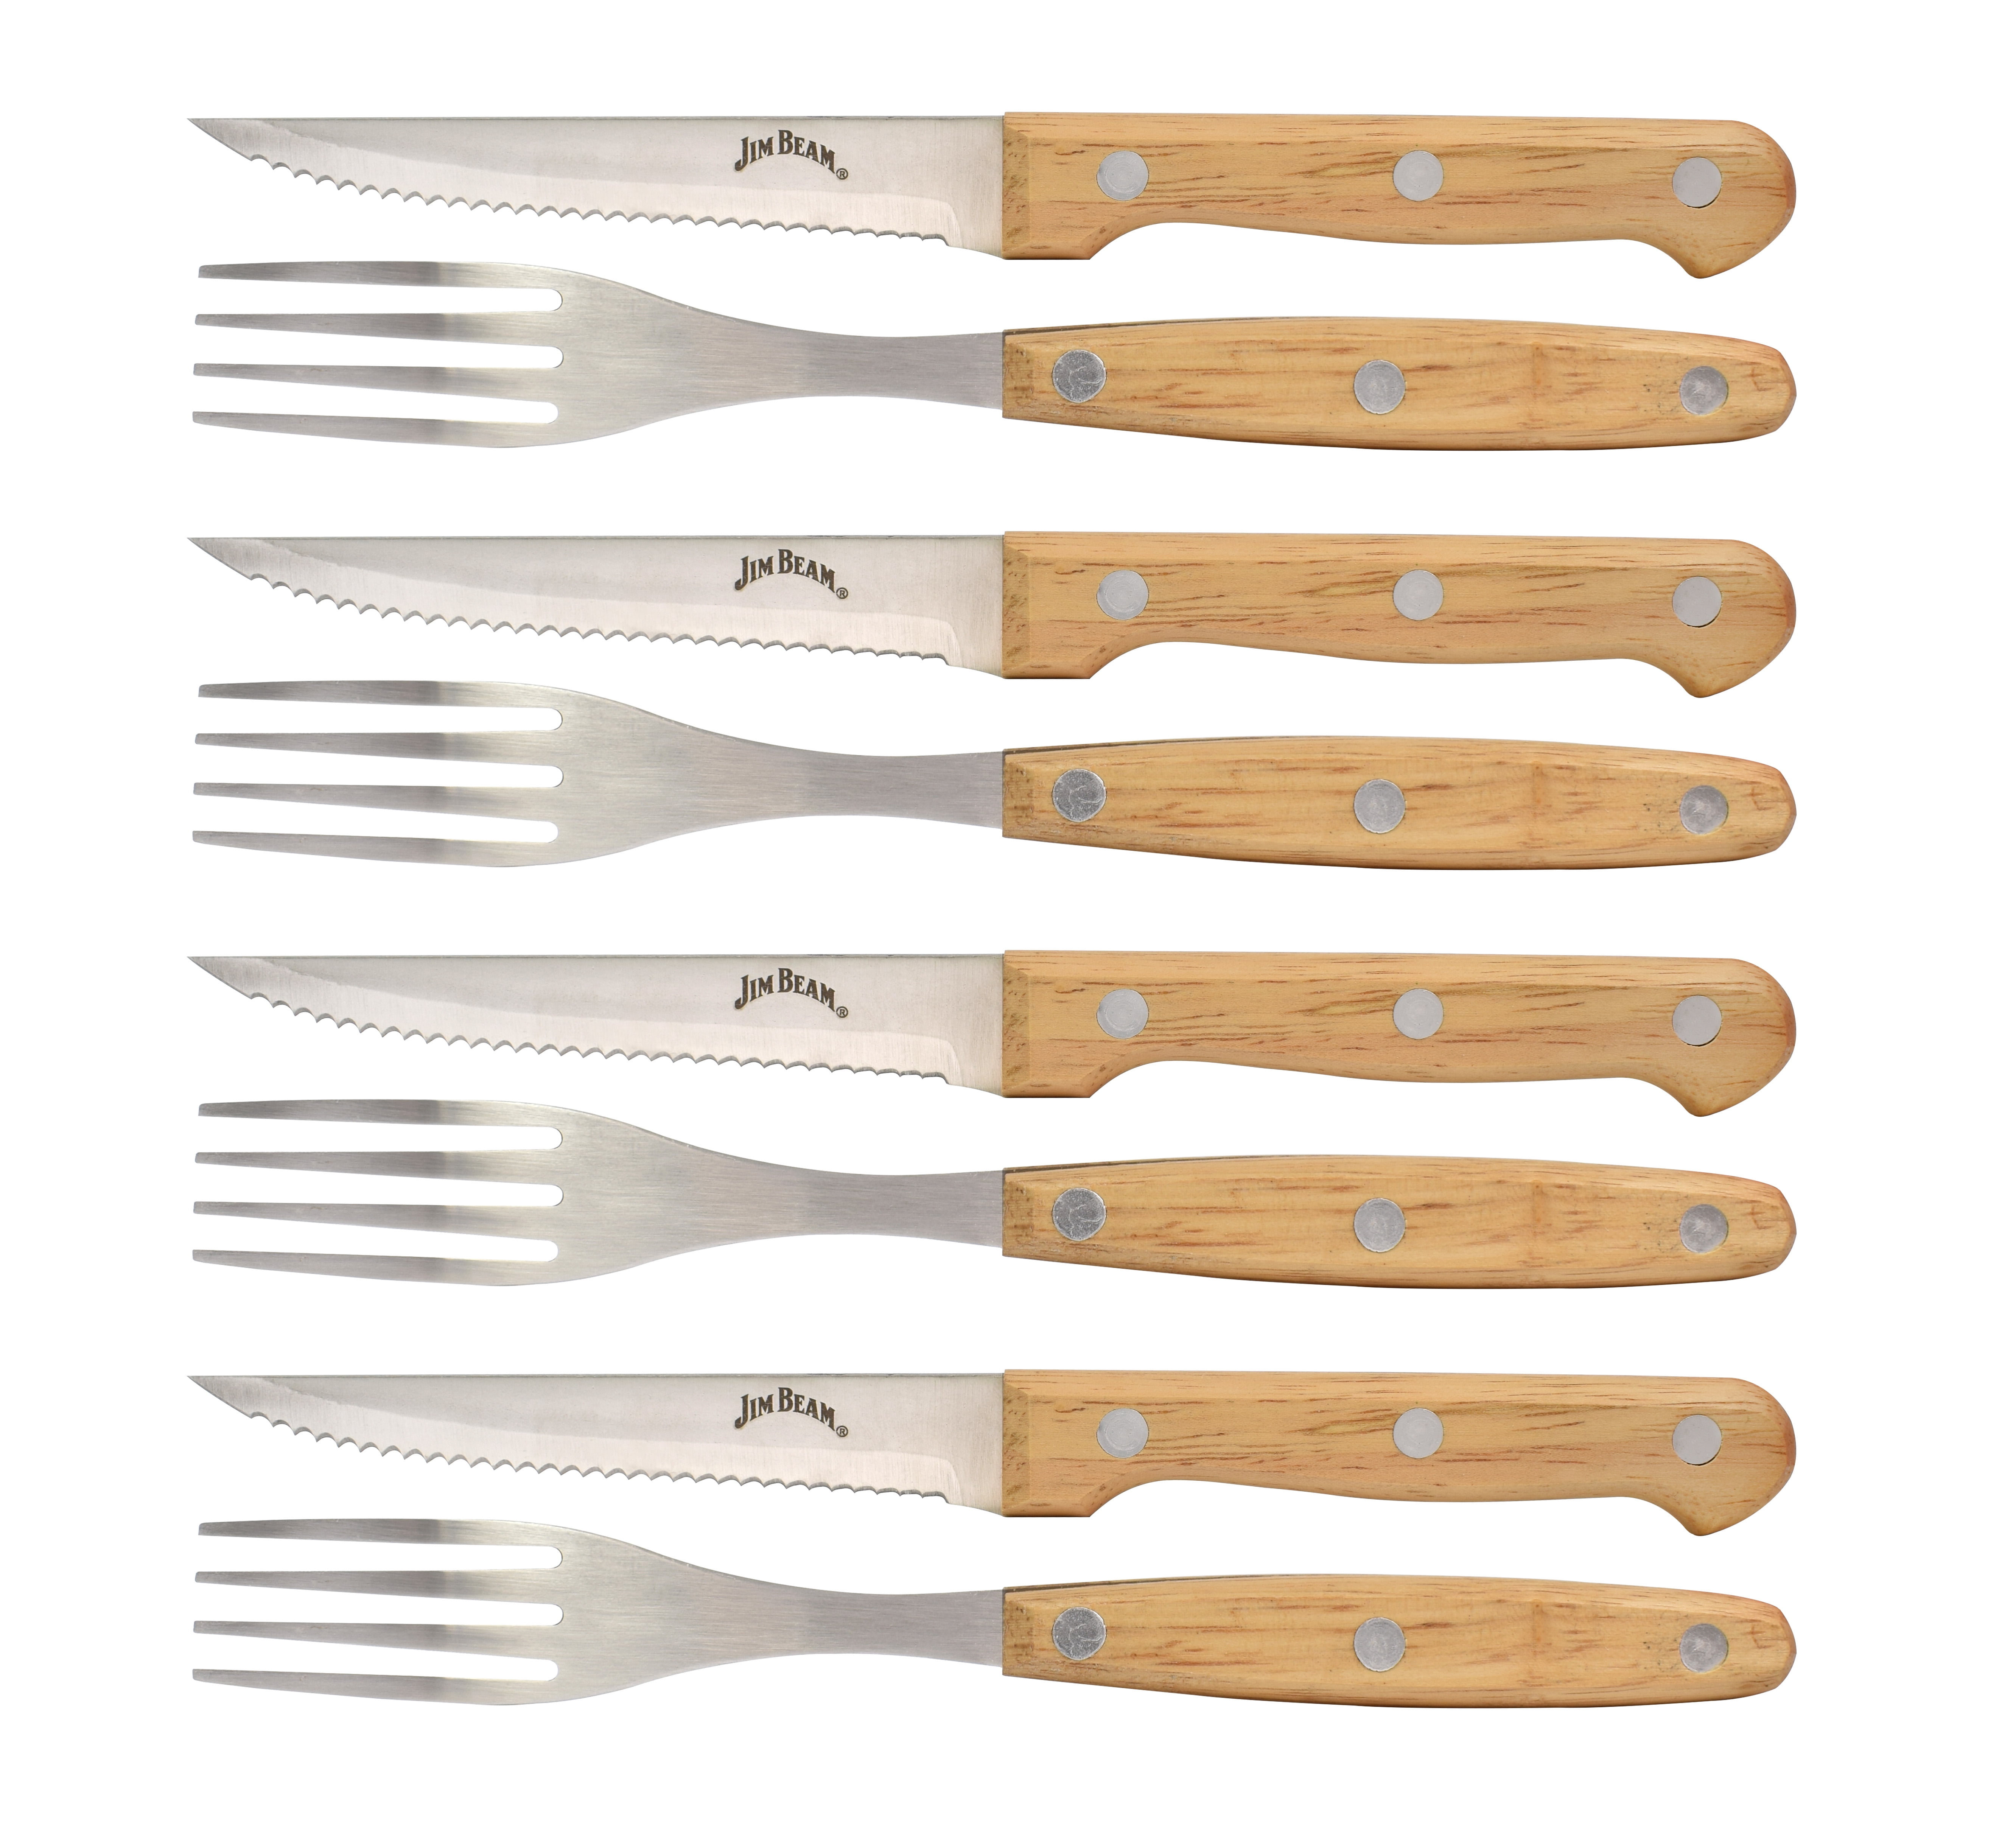 Jim Set of 8 Steak Knives and Forks - Ideal for Steak, Chicken, Pork and more - Steak Knives and Forks made of Stainless Steel Blade and Contoured Wood - Walmart.com